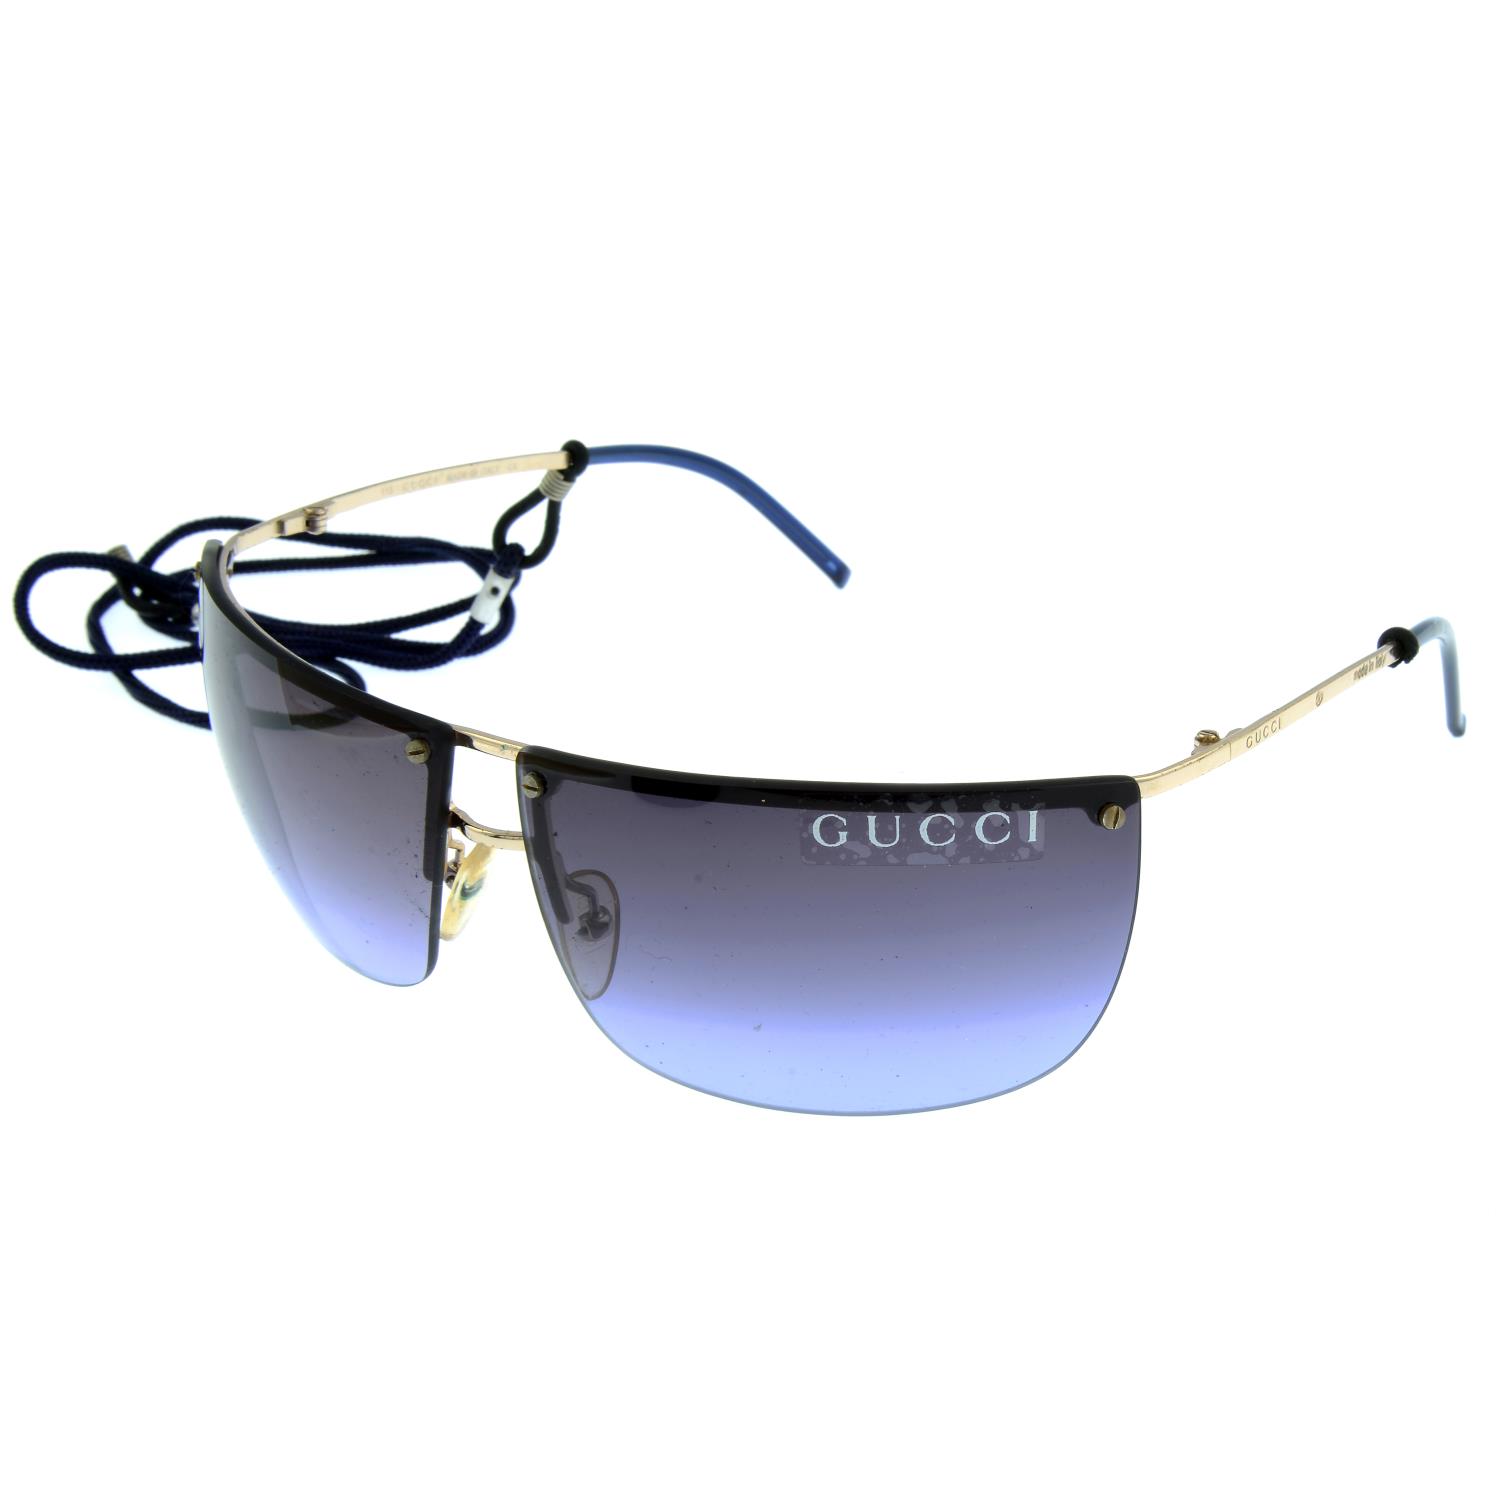 GUCCI - a pair of rimless sunglasses. - Image 3 of 4